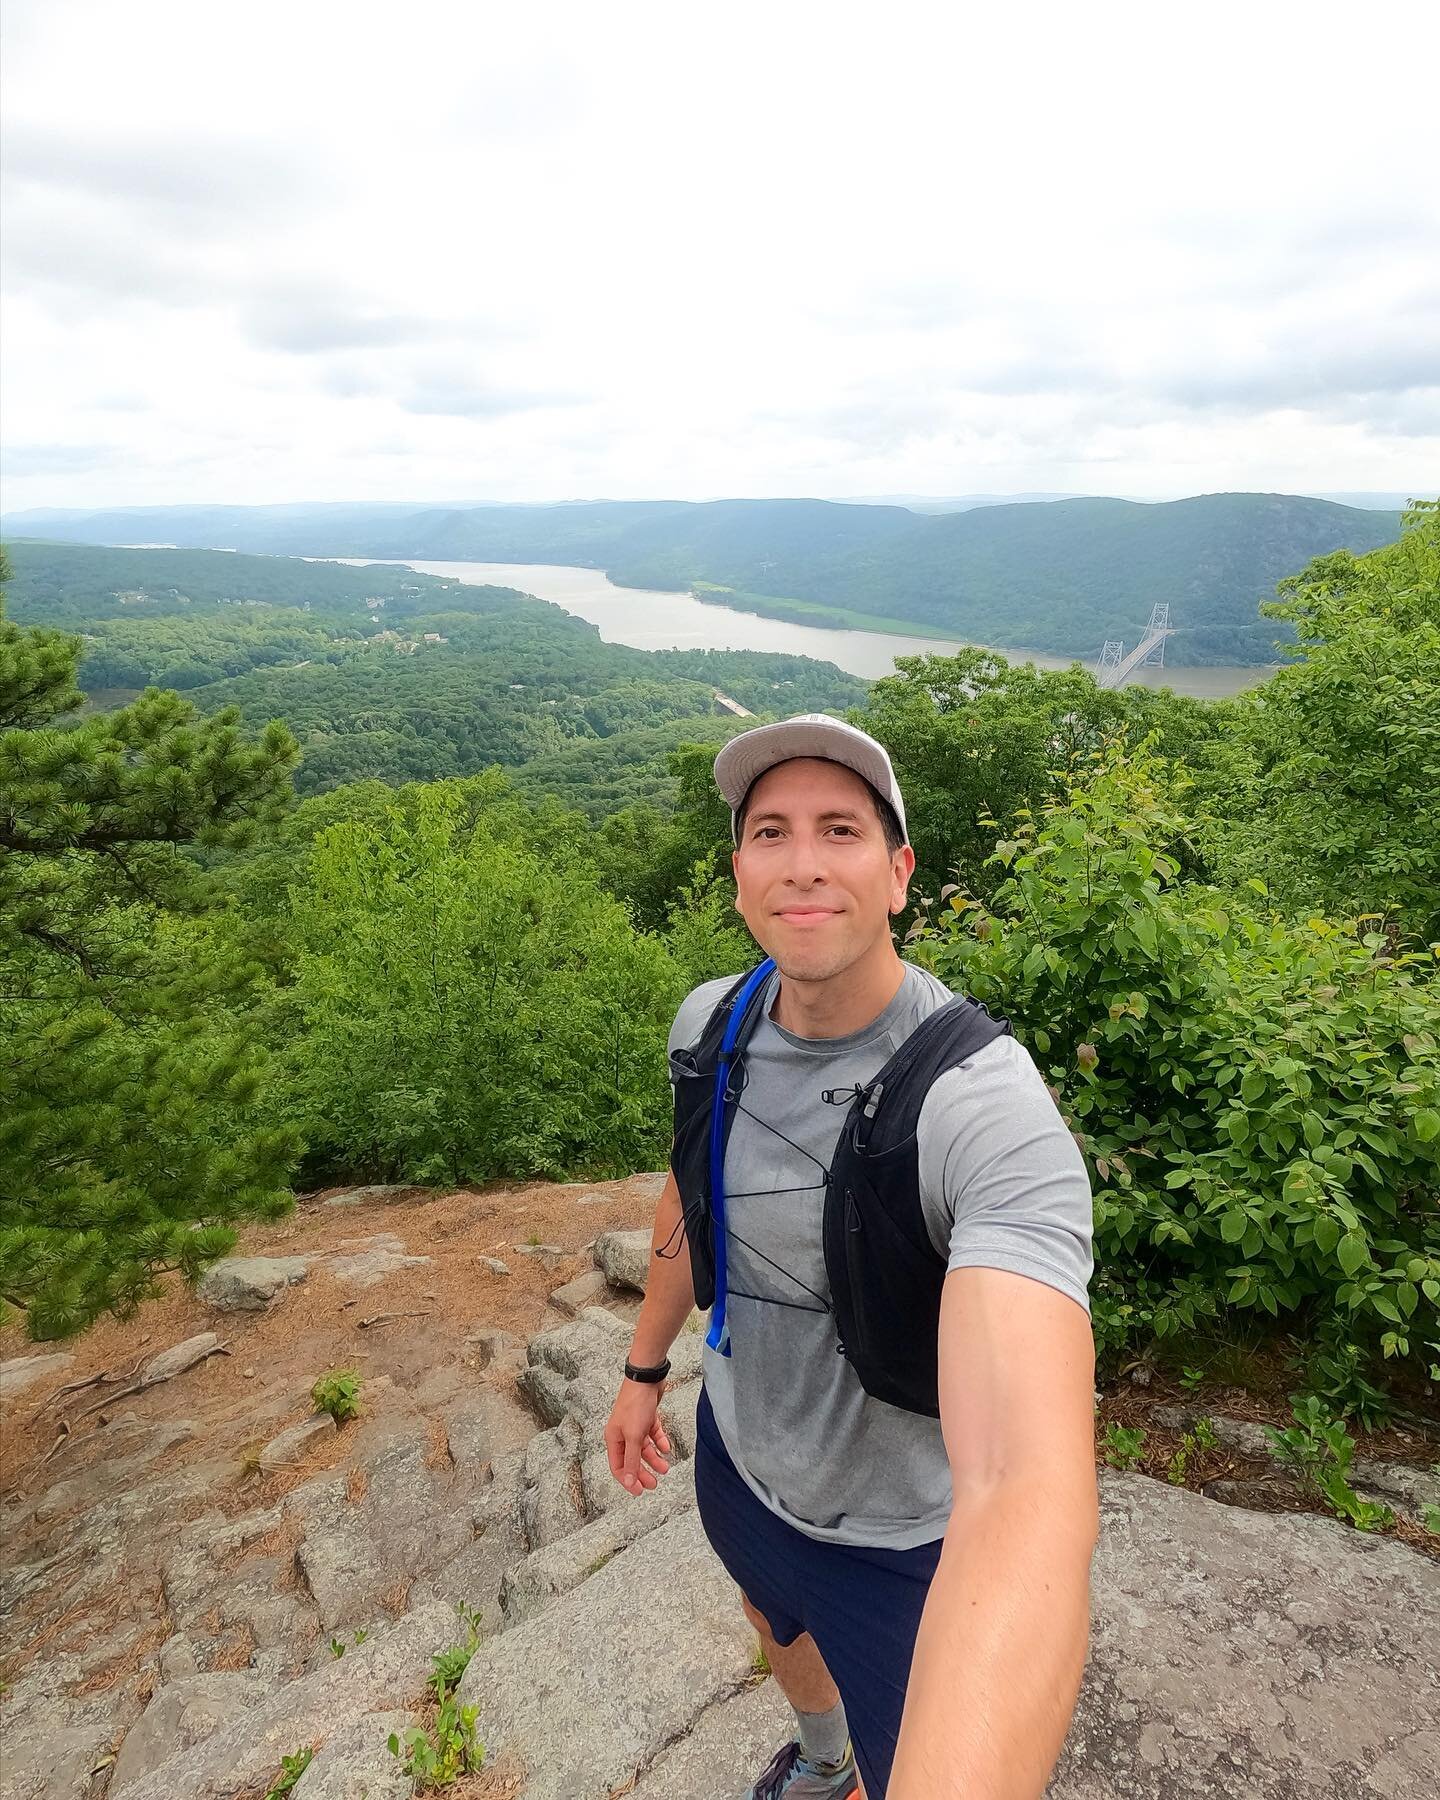 I rarely head out to Bear Mountain because it gets so congested. Much to my surprise, it wasn&rsquo;t too busy at all this morning. It was great for a trail run. With the pandemic fading, will we see less people on the trail? 🤔